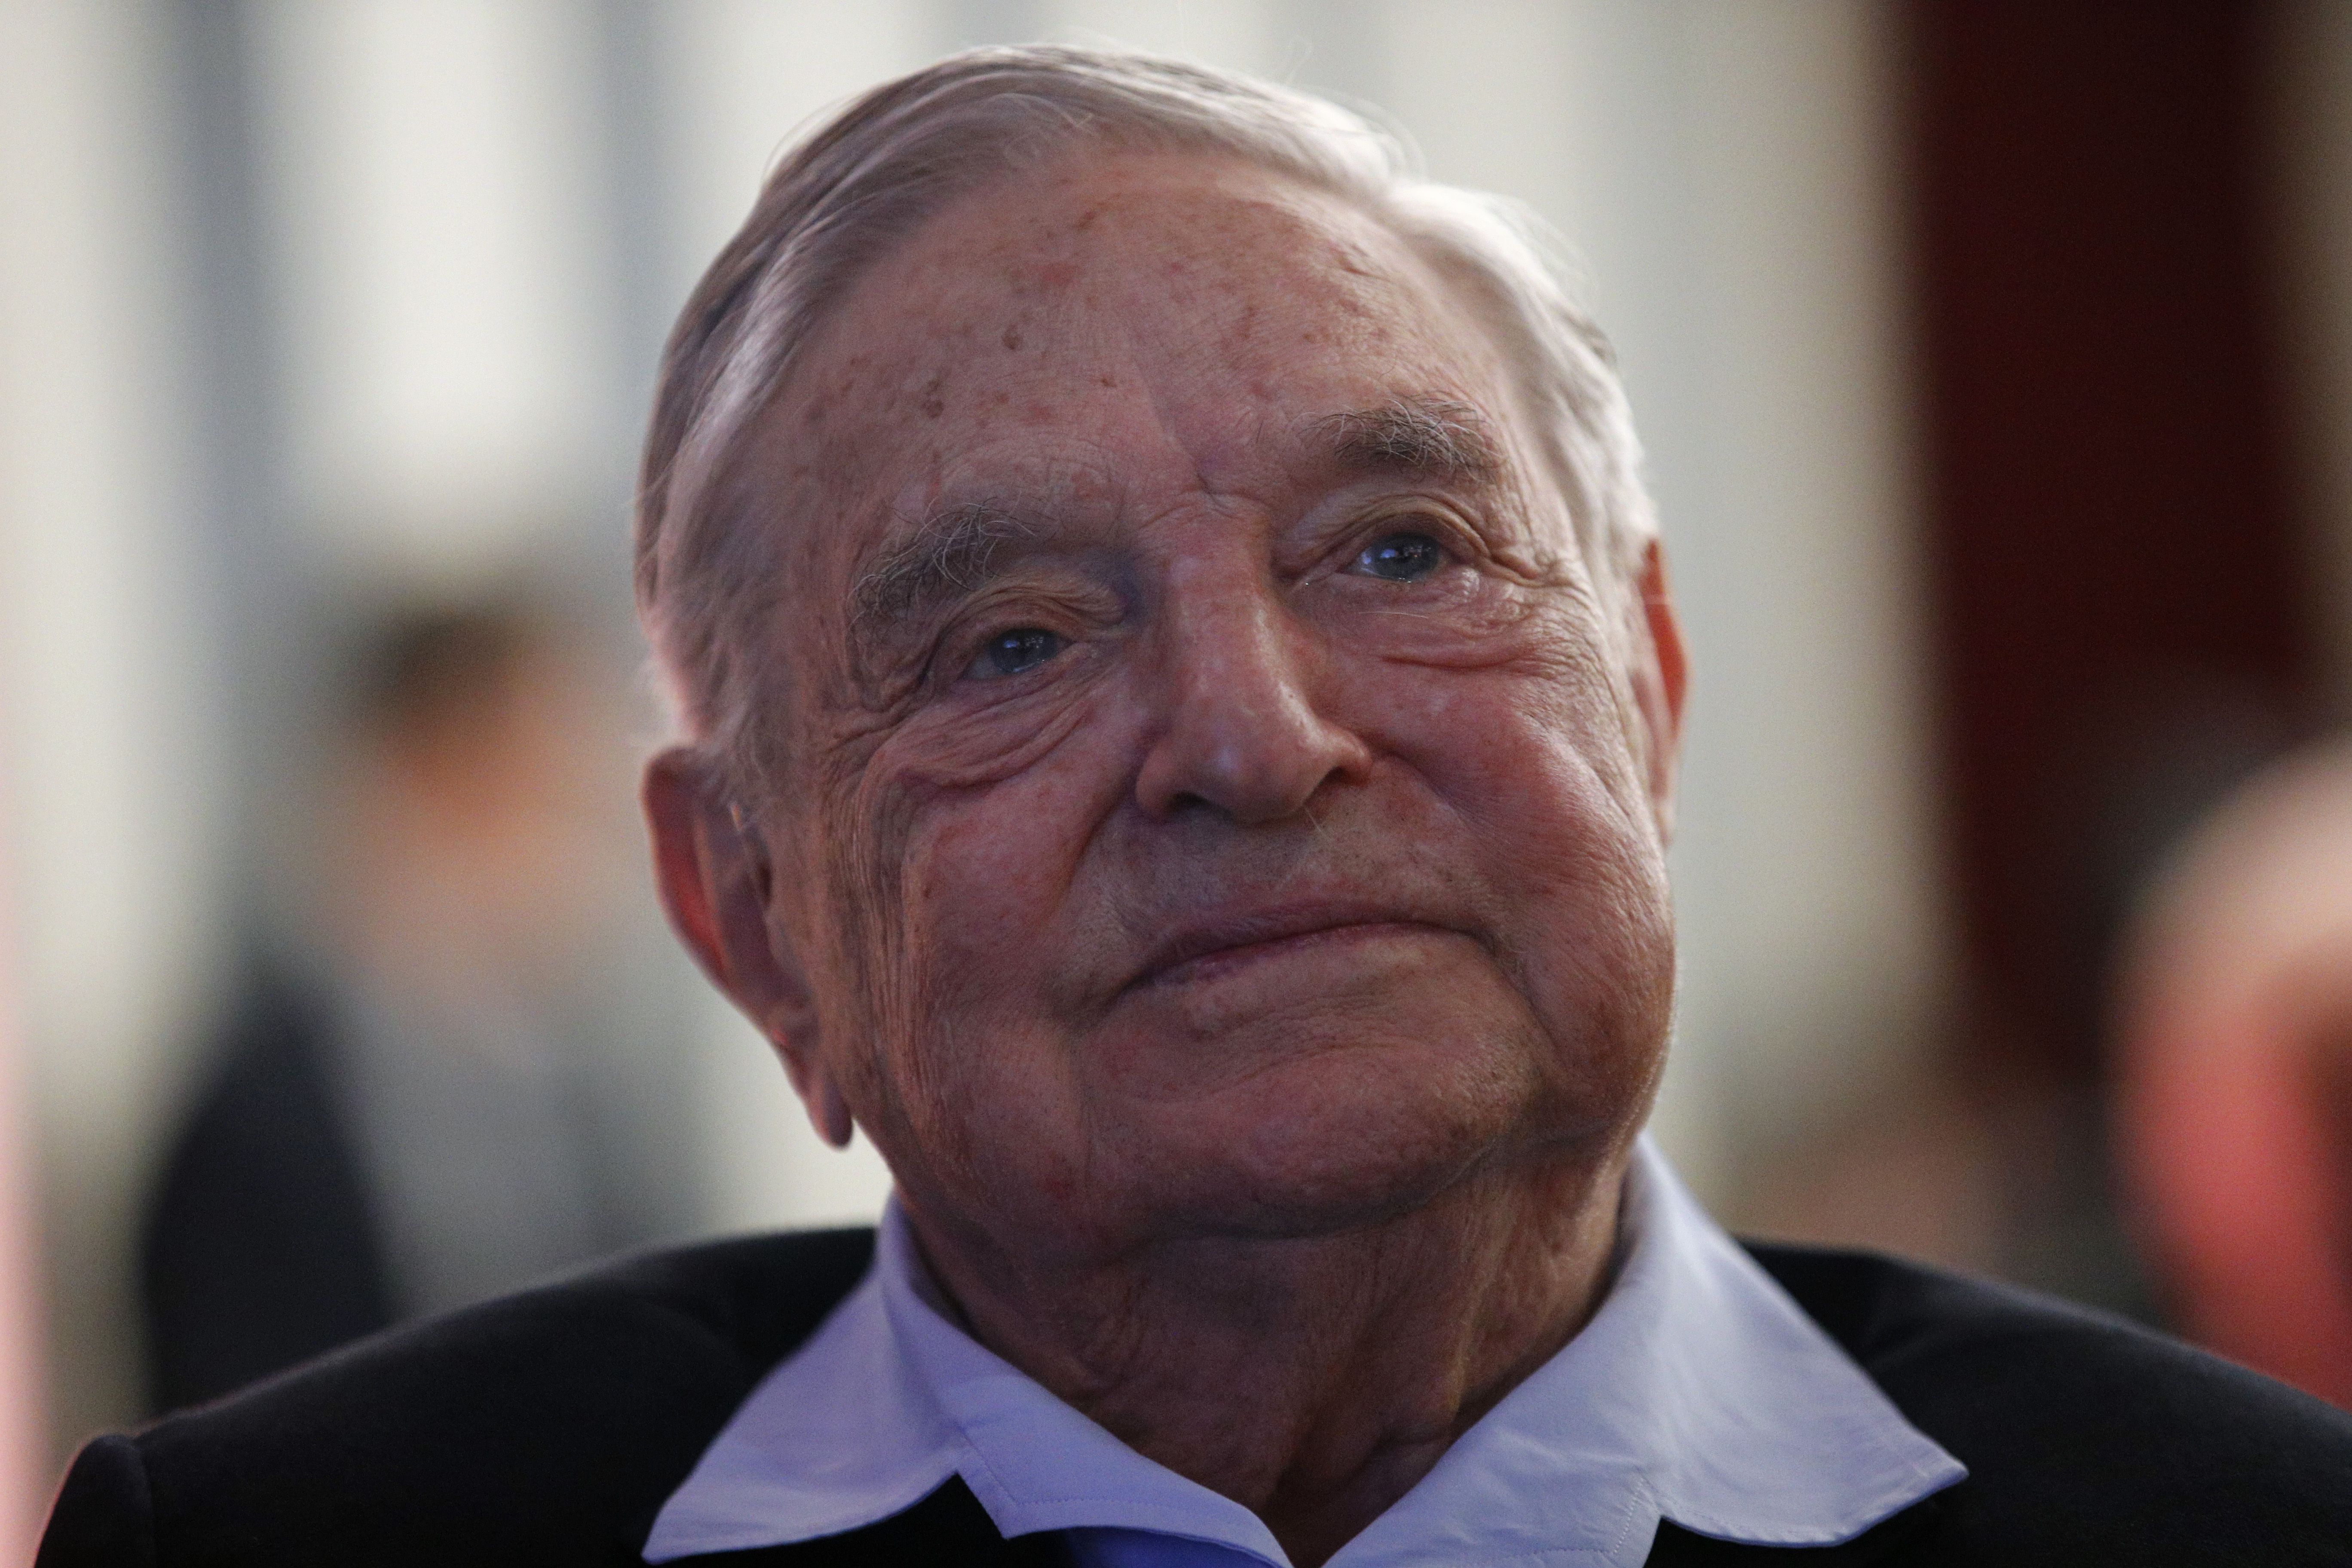 I must be doing something right': Billionaire George Soros faces renewed attacks with defiance Washington Post